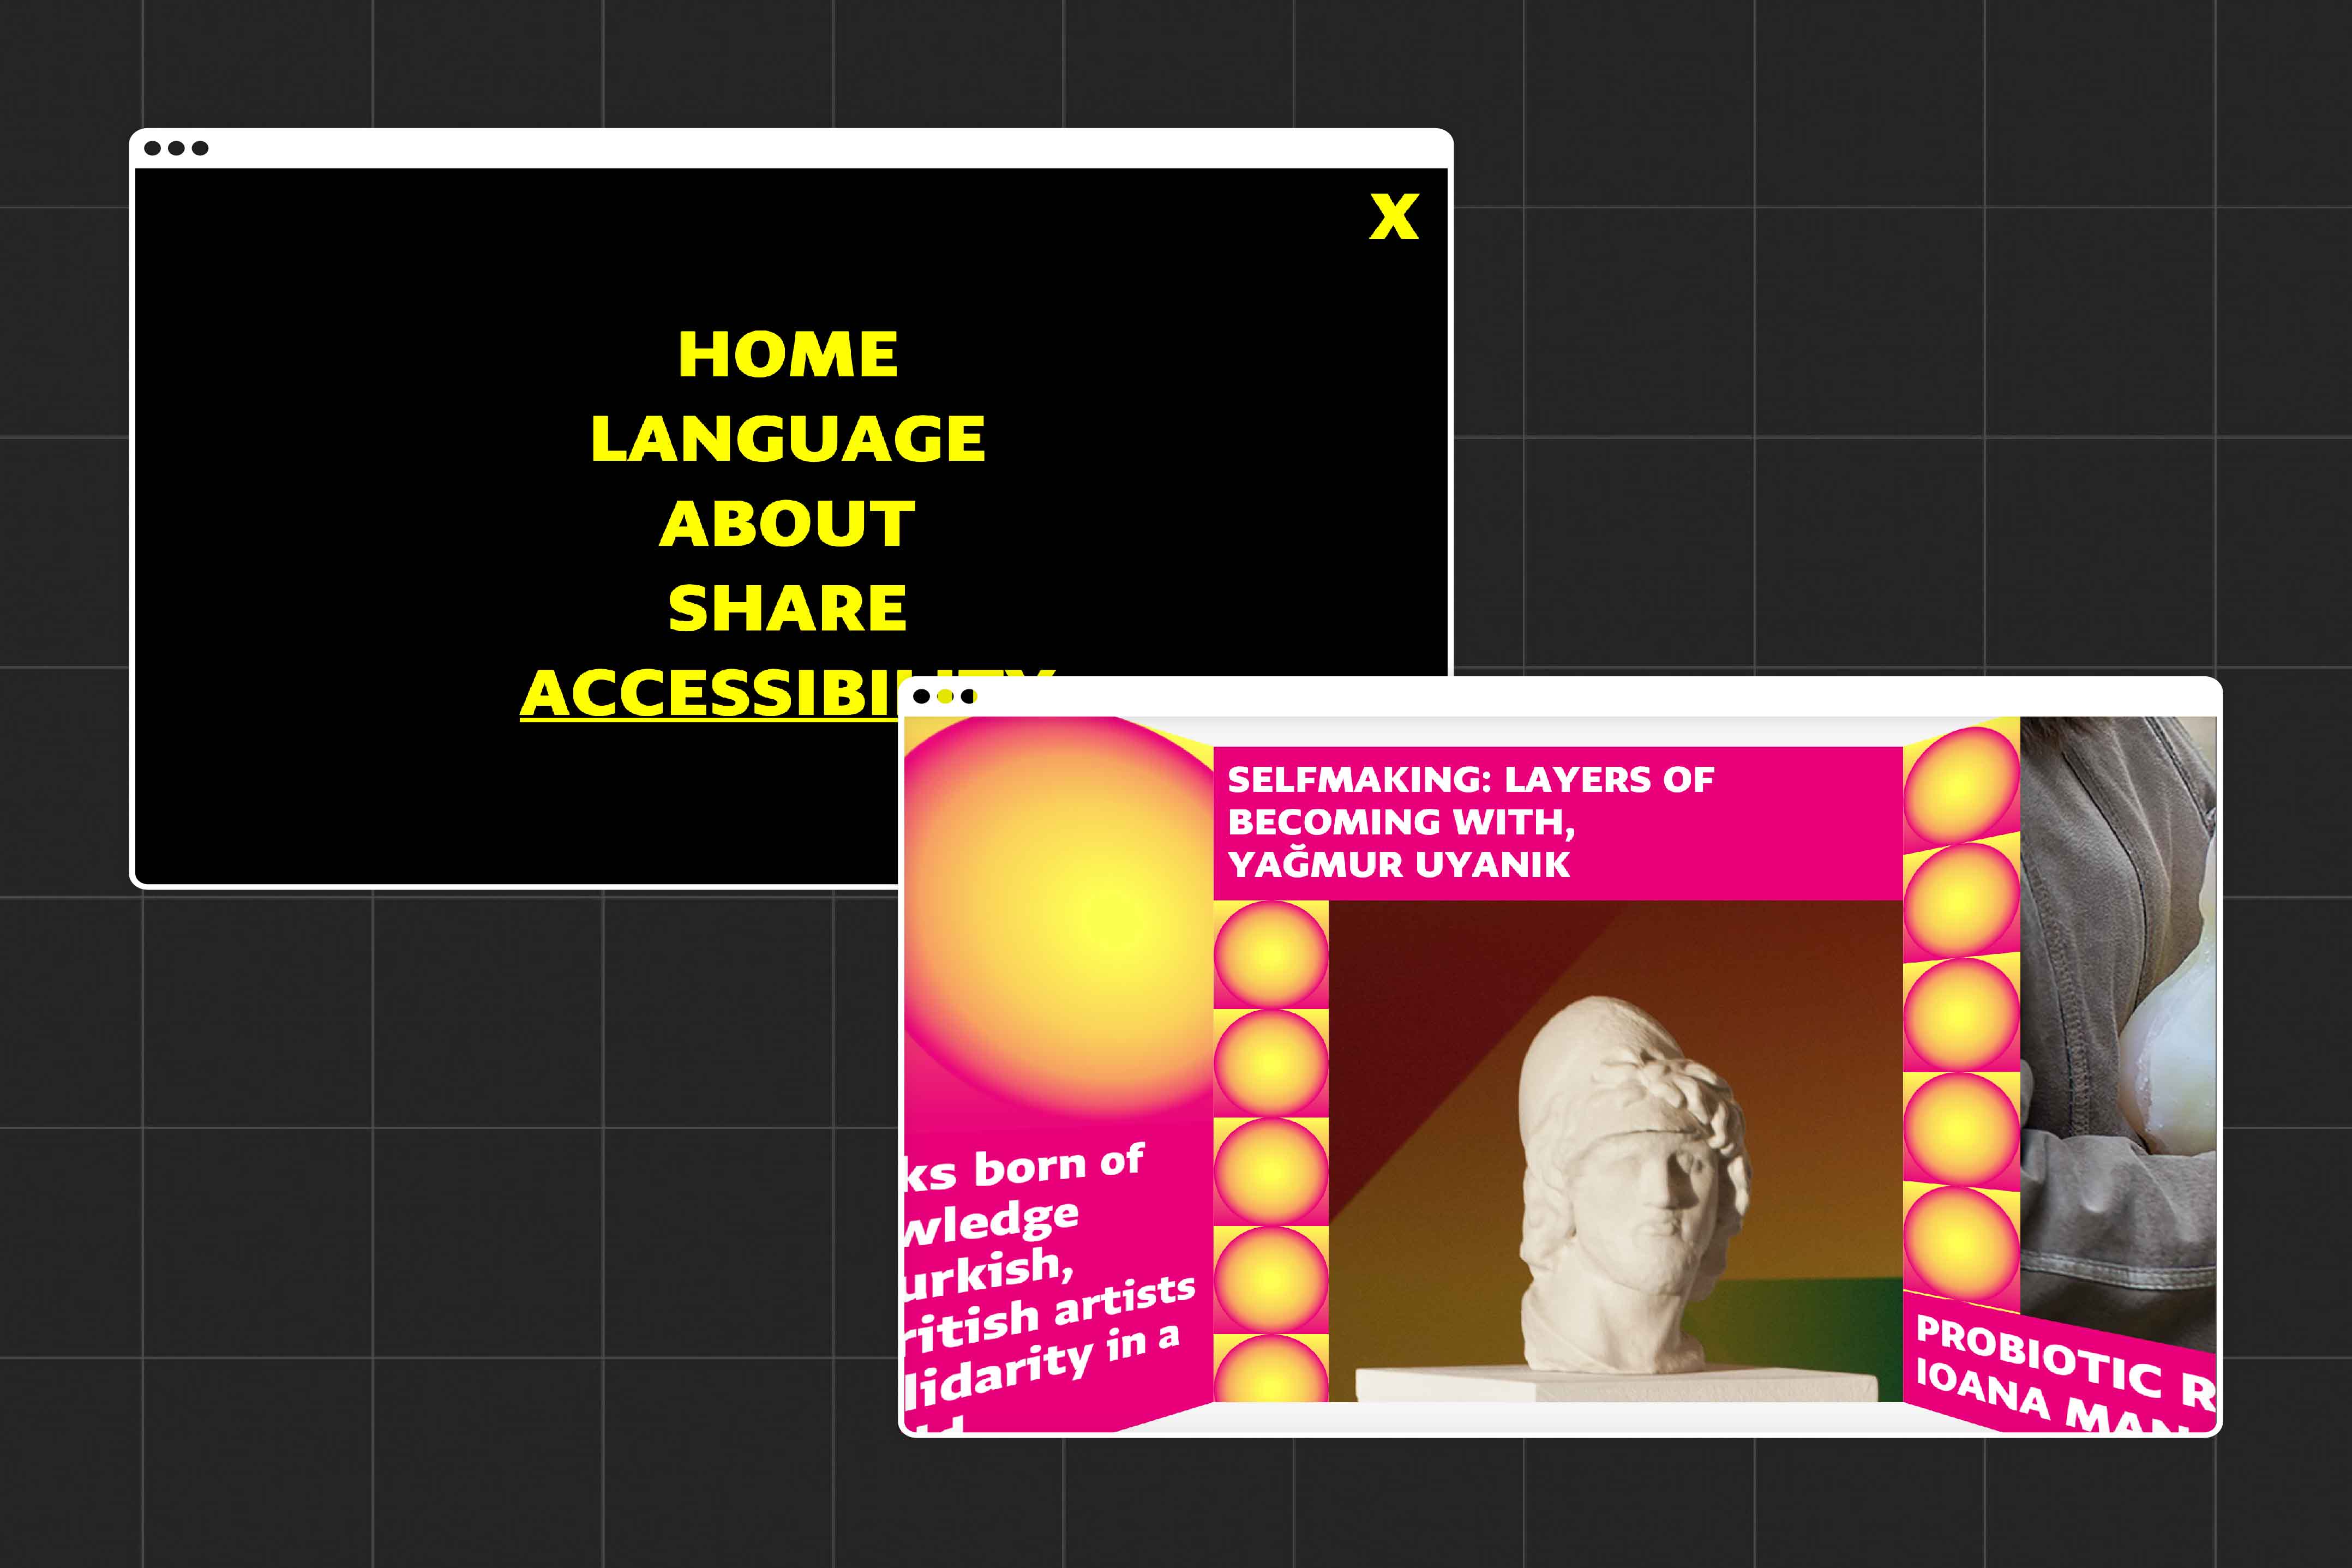 The image shows two parts of the website, the first is the menu overlay which shows the pages and access features on the website. The second shows the specially built carousal used on the website, to create a sense of being inside the Gallery space.